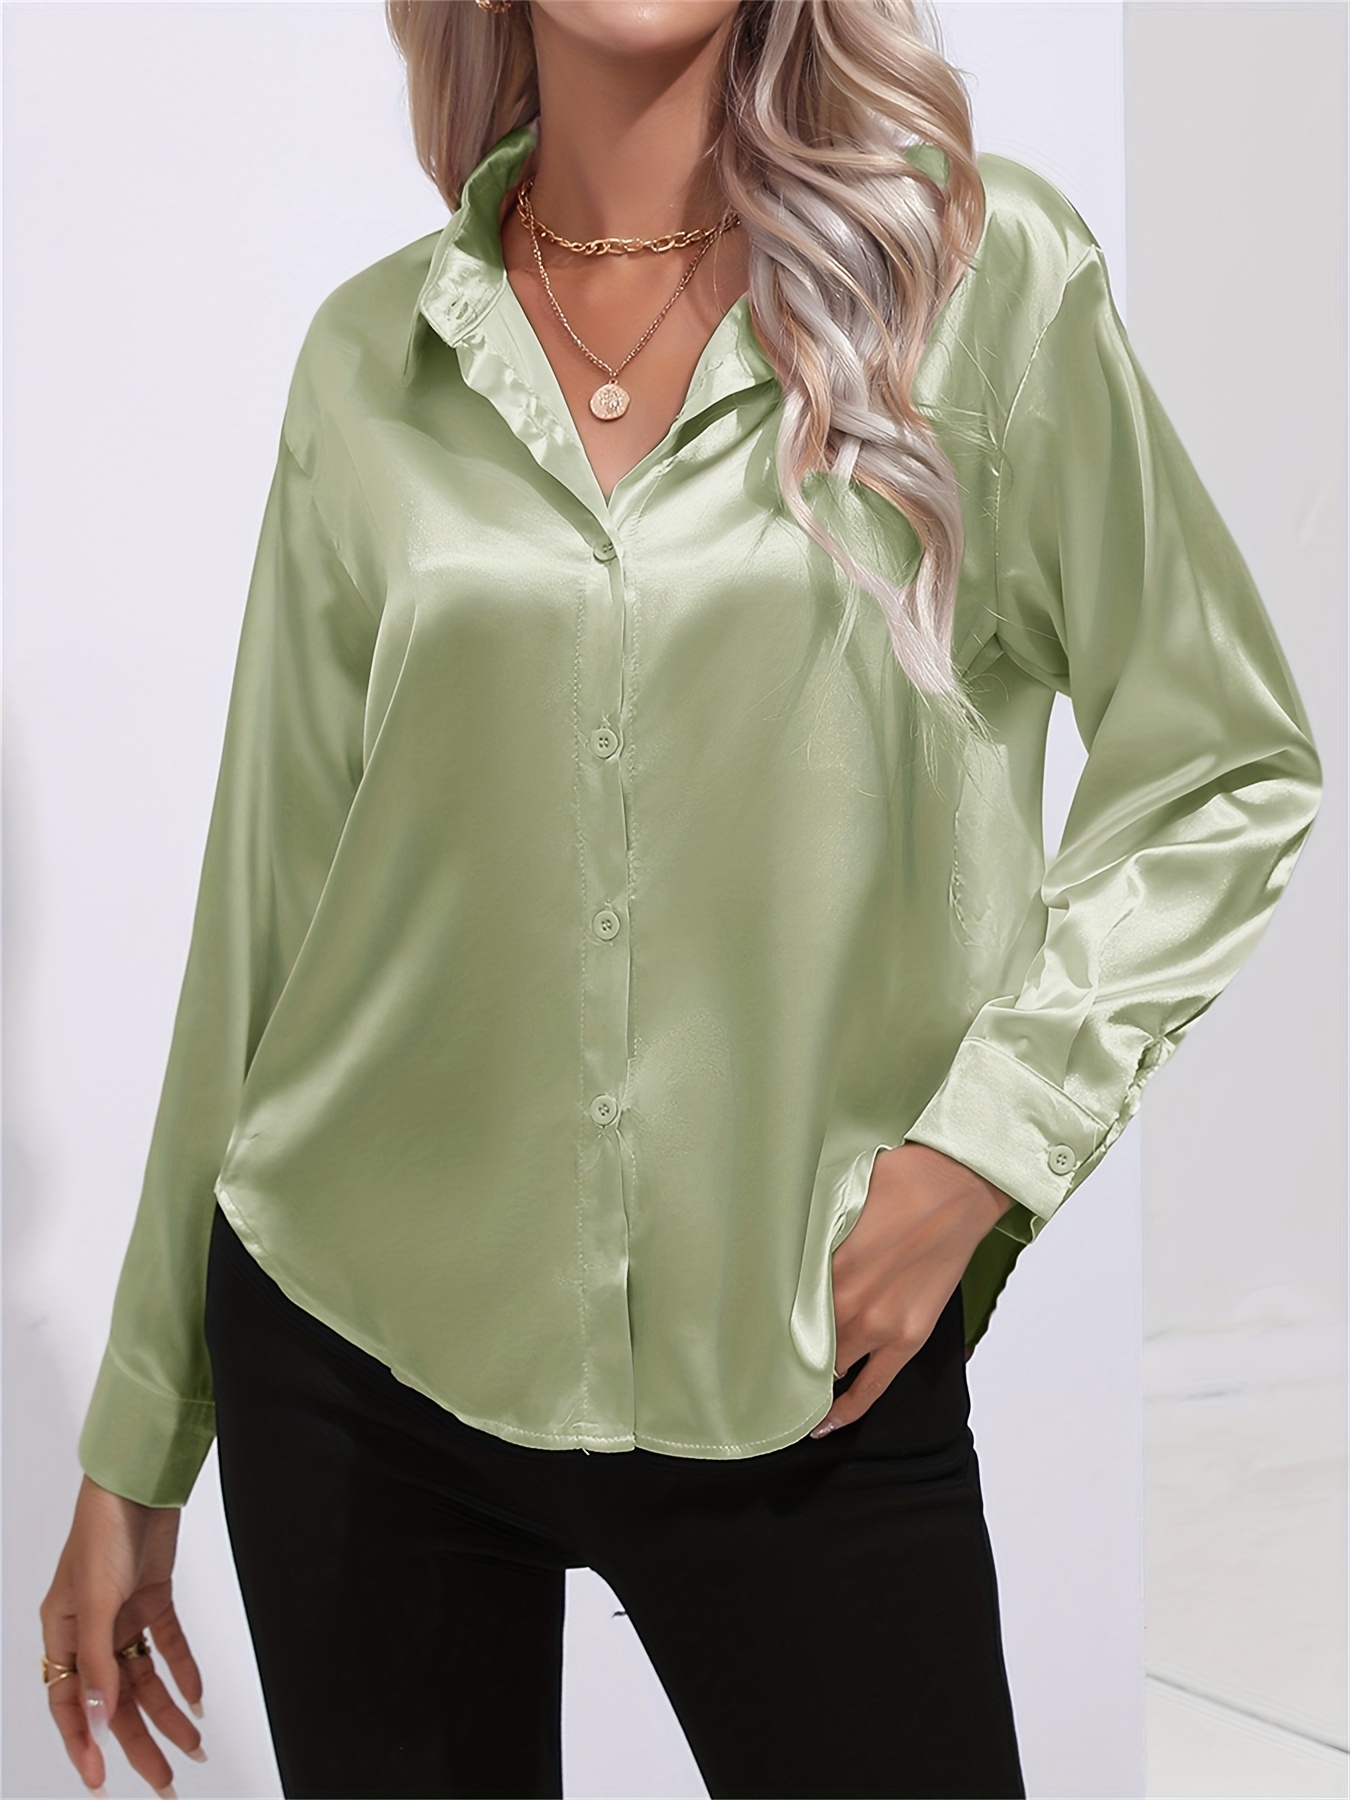 solid smoothly shirt, solid smoothly shirt elegant button front turn down collar long sleeve shirt womens clothing details 65